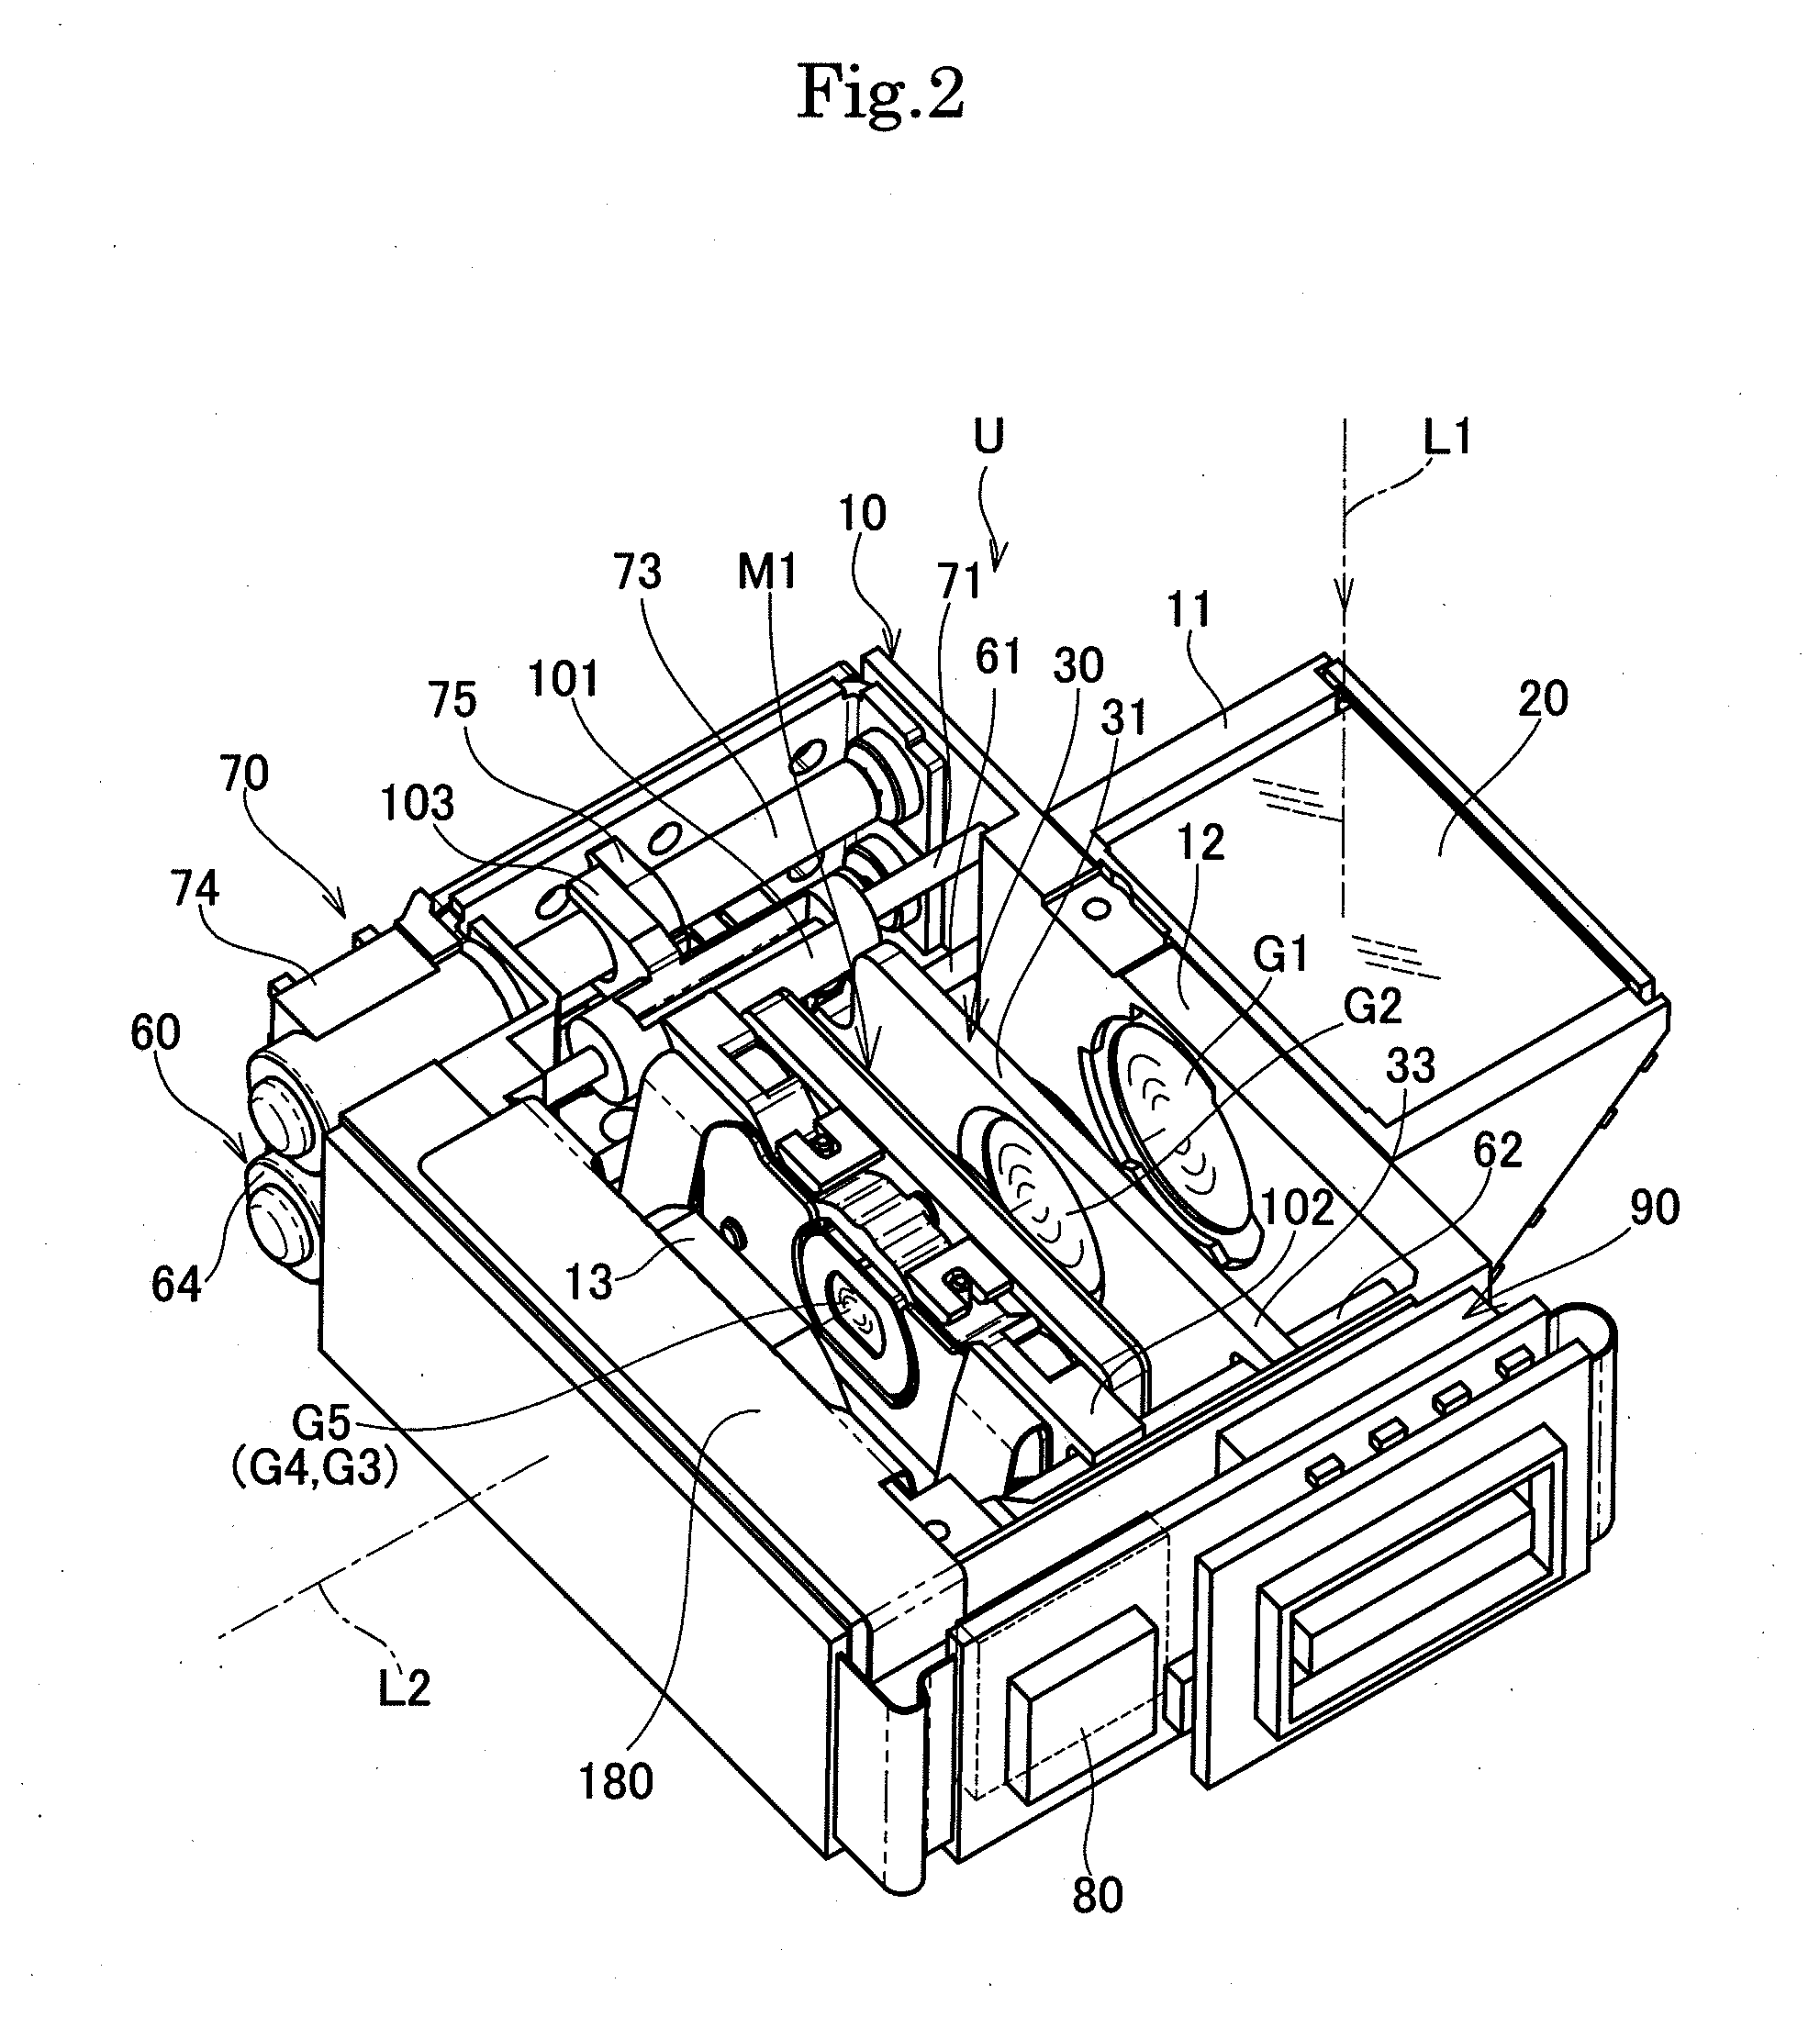 Image blur correction apparatus and image pickup unit having image blur correction apparatus